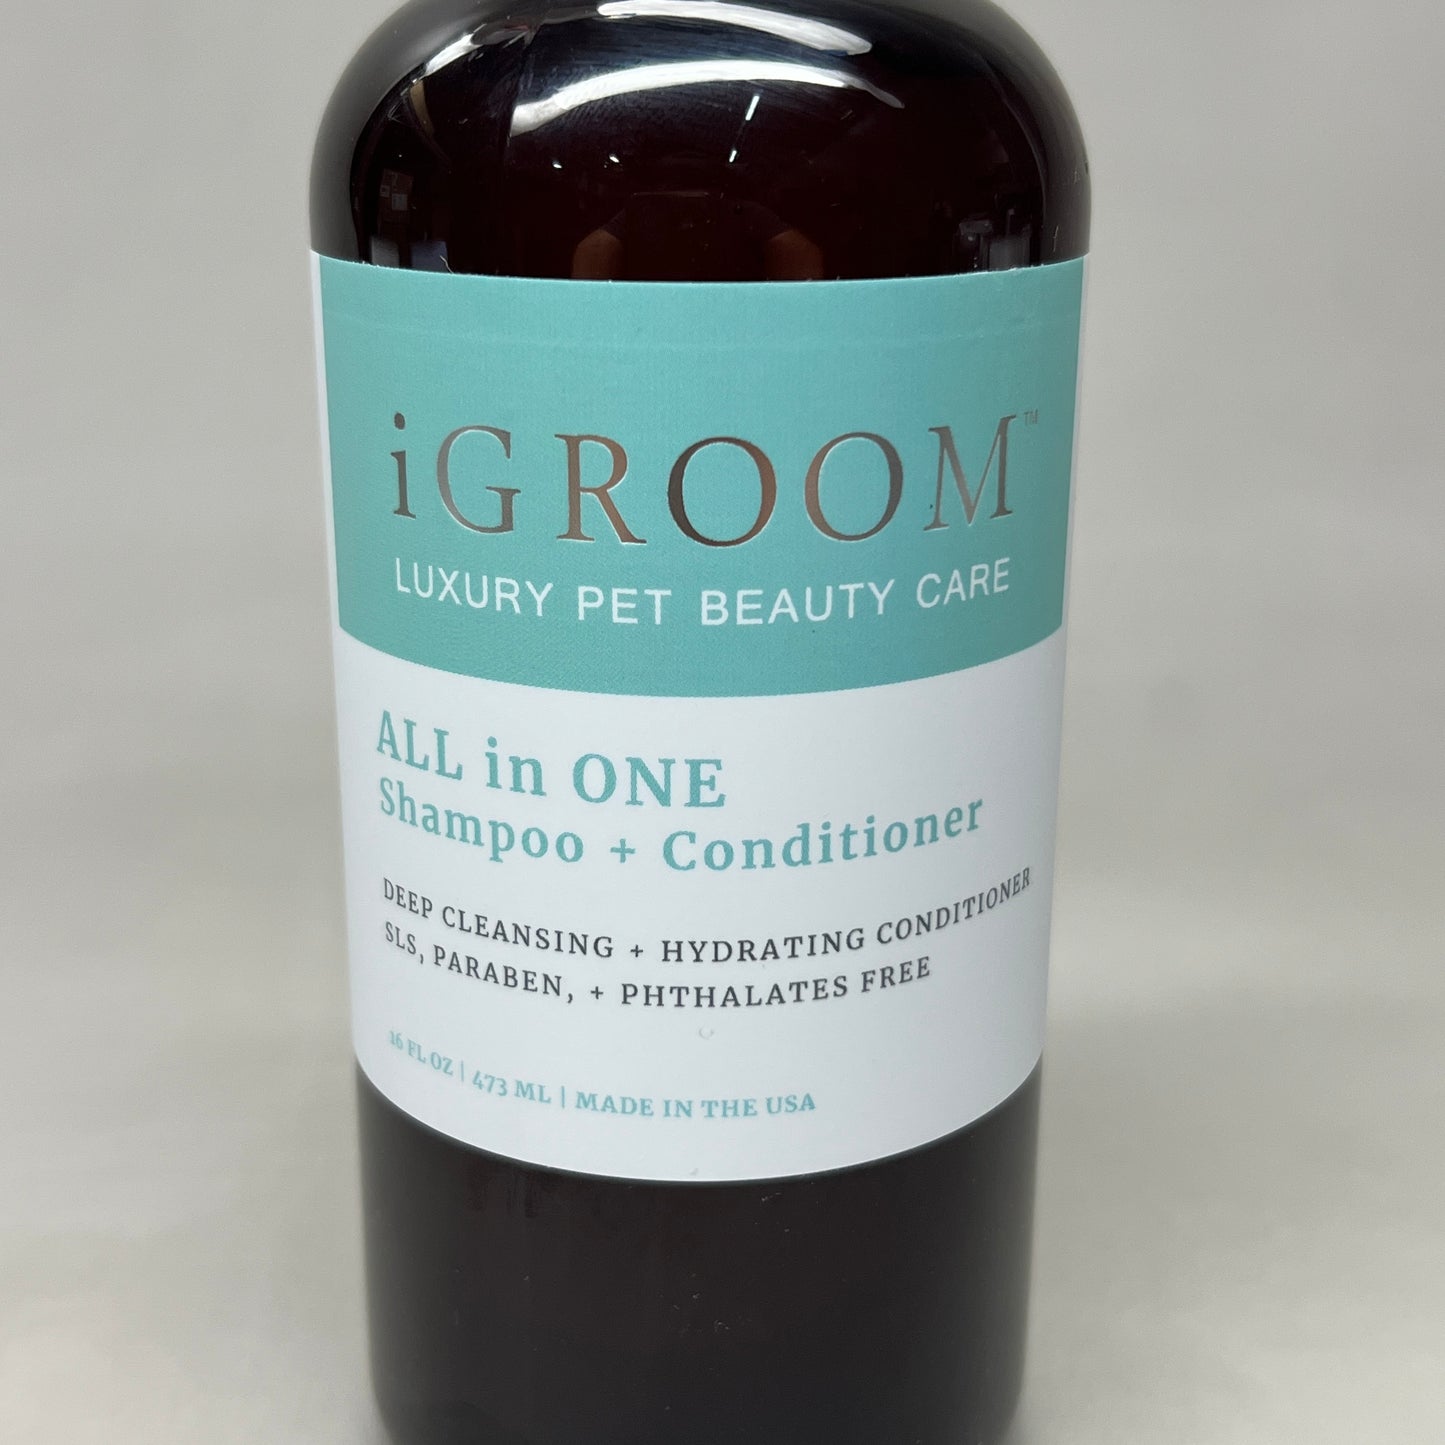 IGROOM All in One Pet Shampoo + Conditioner, Luxury Pet Beauty Care 16 fl oz (New)